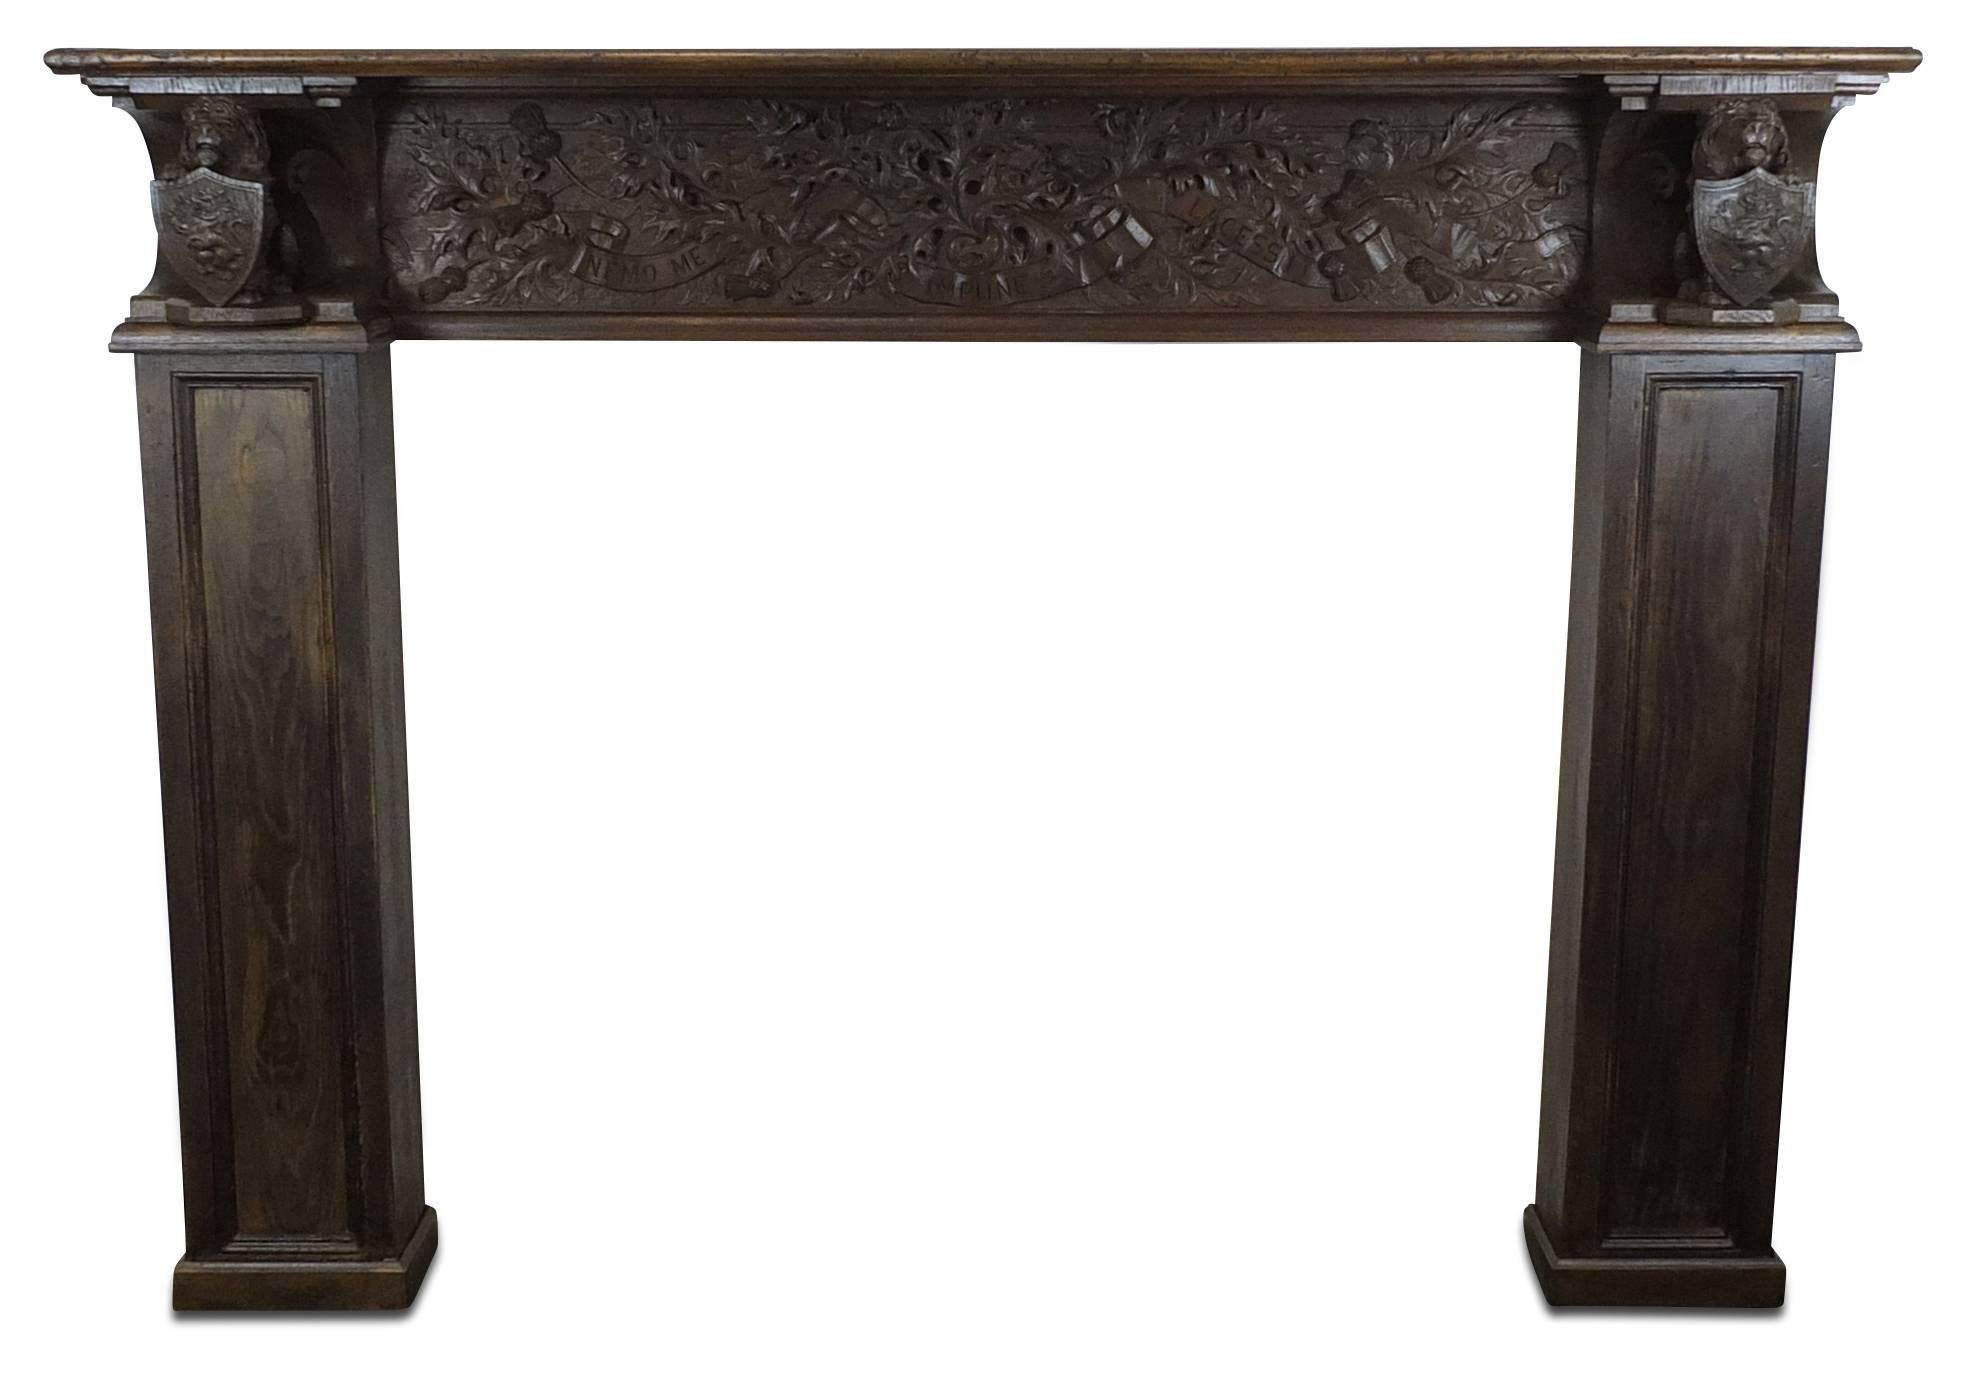 Large and Historically Important 19th Century Scottish Oak Fireplace Mantel For Sale